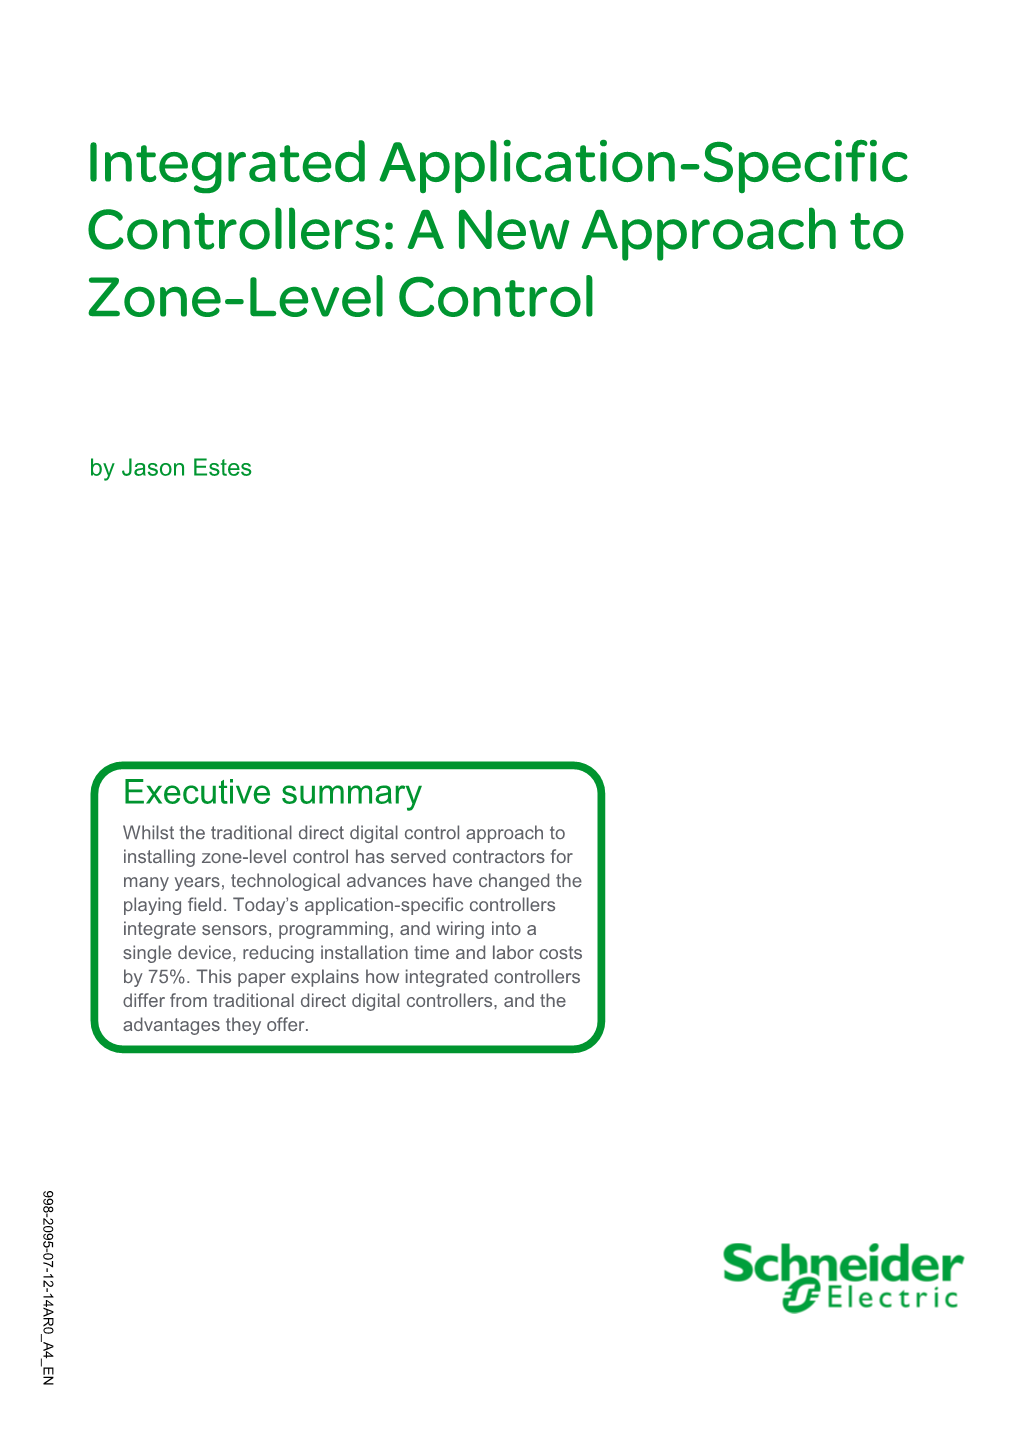 Integrated Application-Specific Controllers: a New Approach to Zone-Level Control